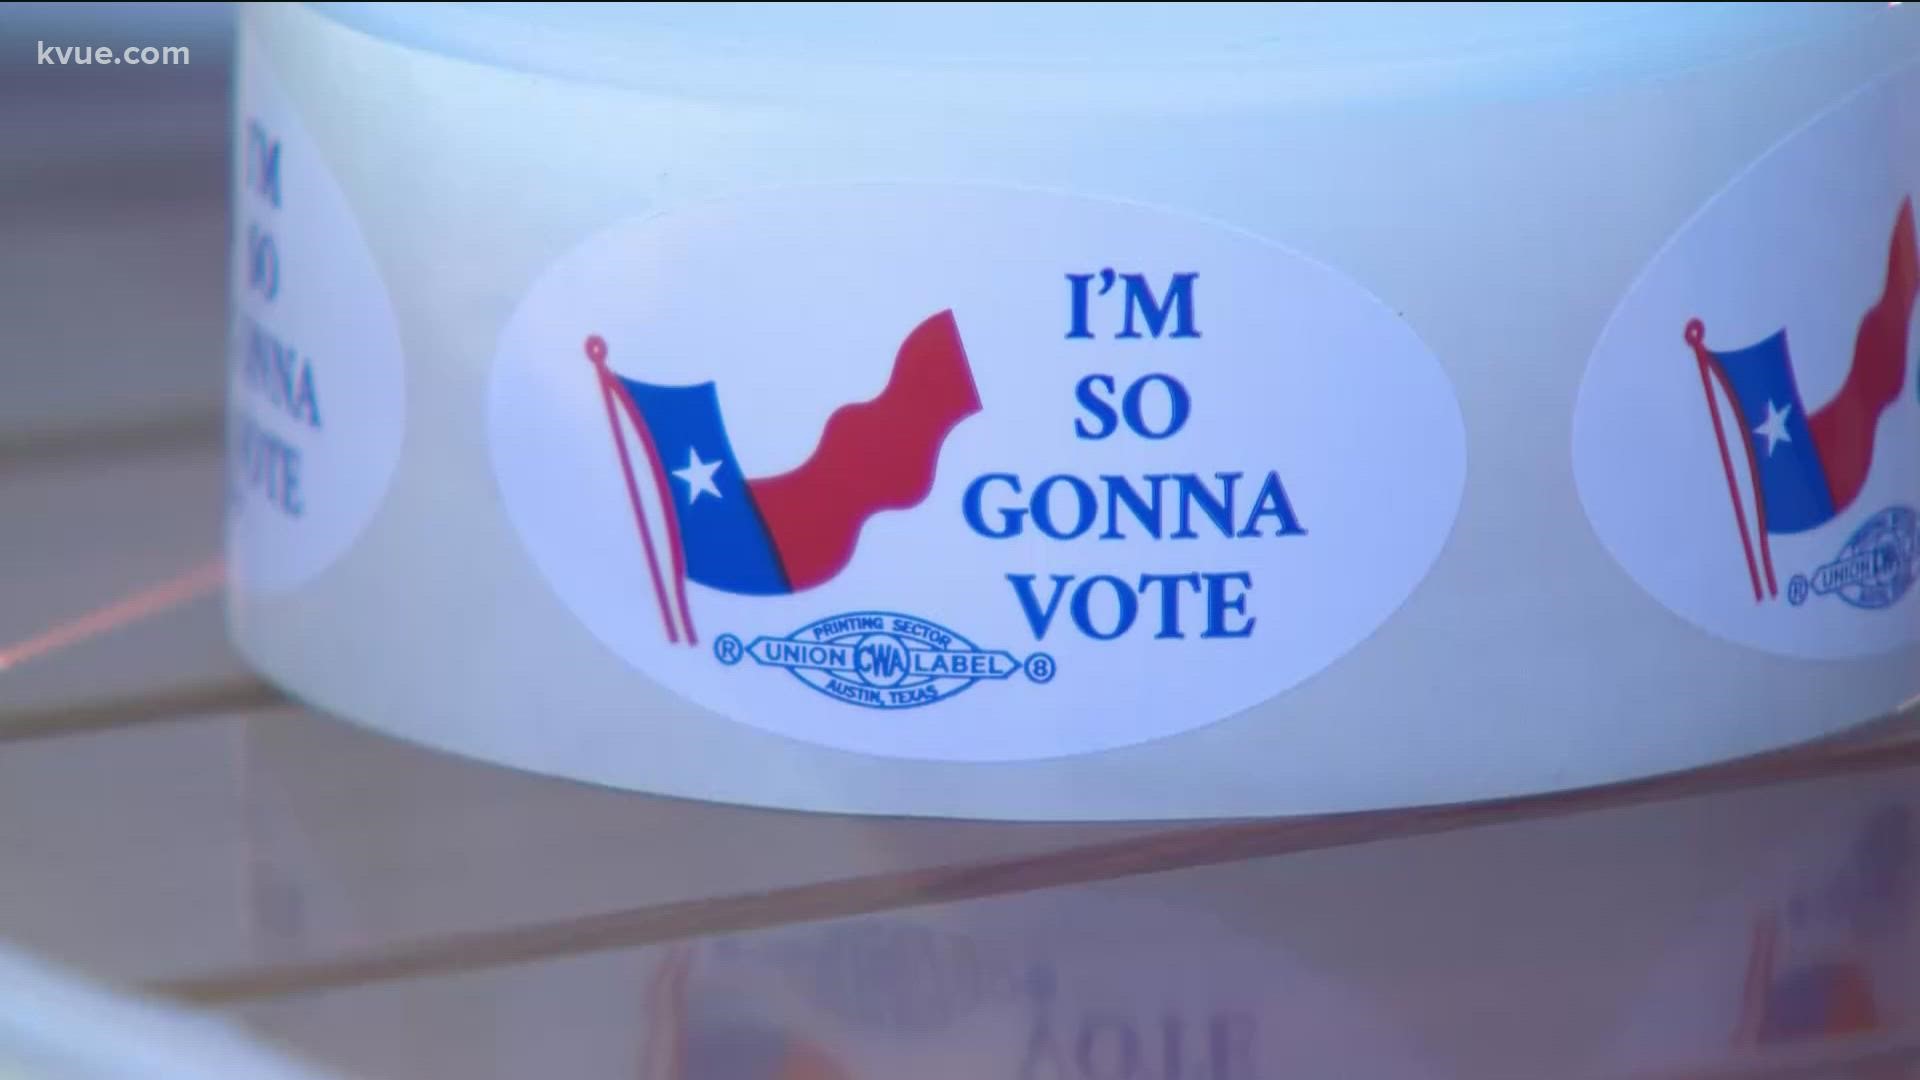 The deadline to register to vote for the Texas primary on March 1 is Monday, Jan. 31.